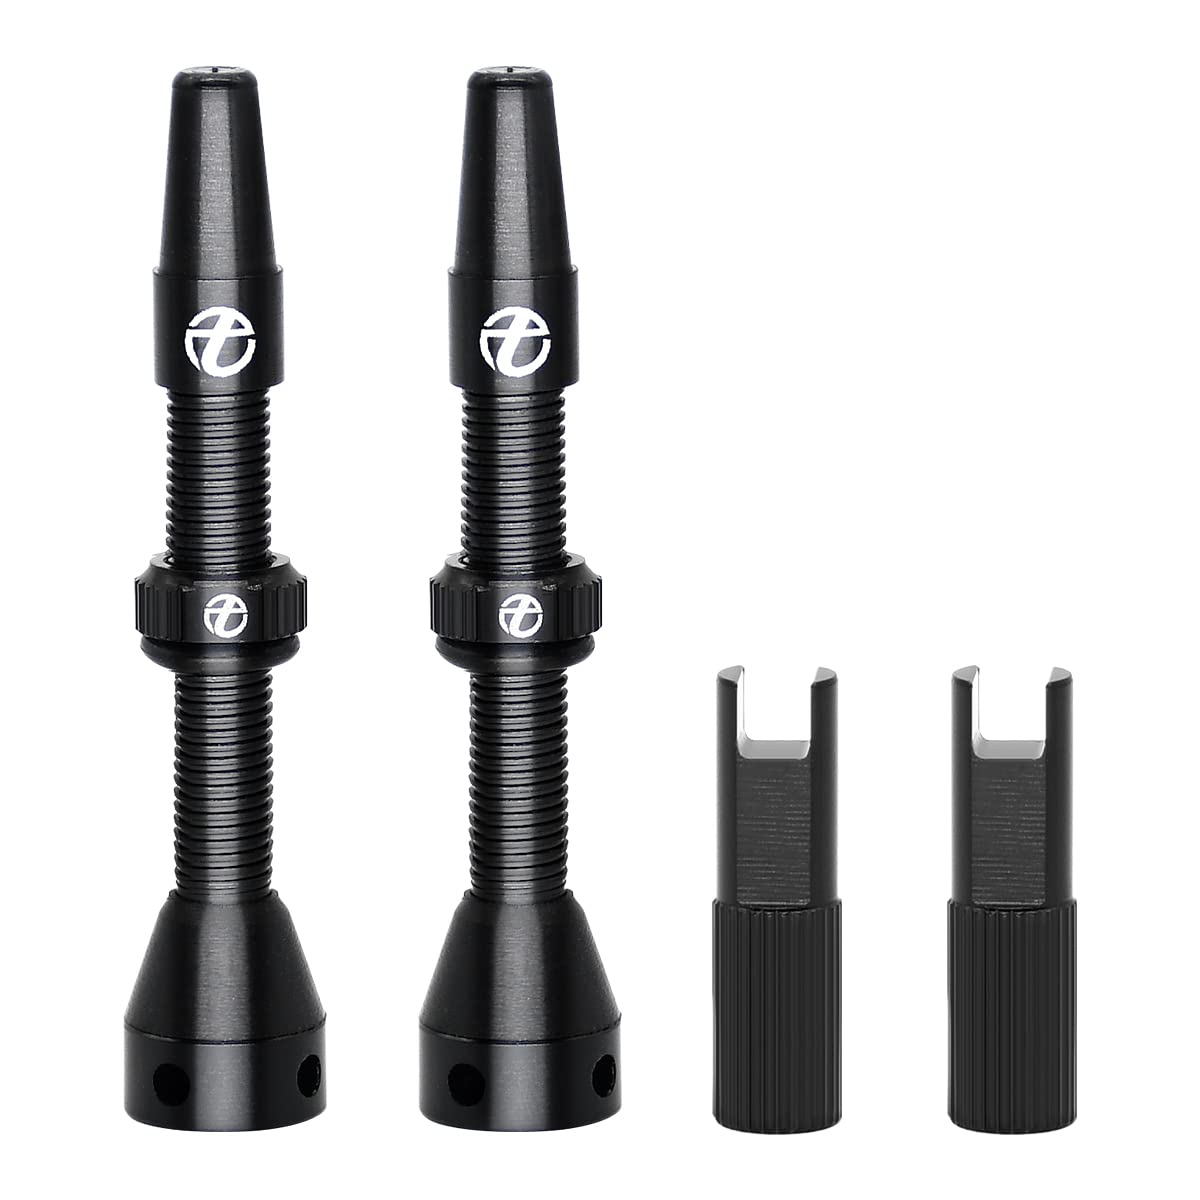 Tubeless Presta Valve Stems with Integrated Valve Core Tool - 44mm